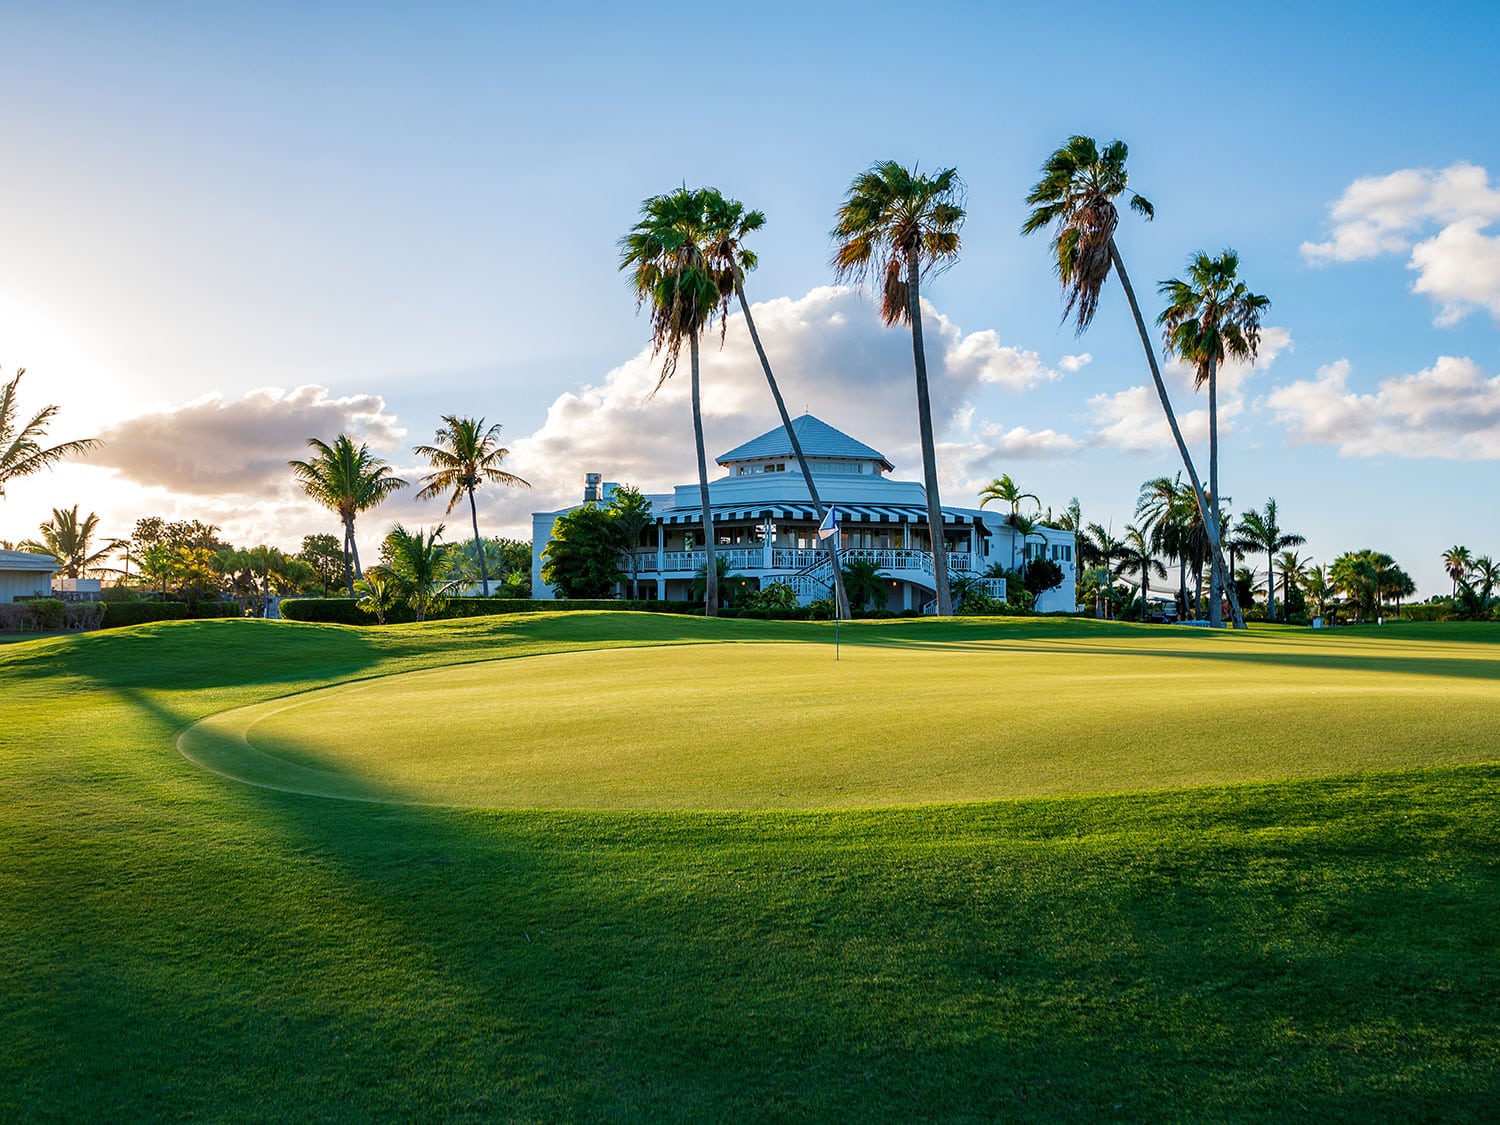 A view of the clubhouse at Royal Turks and Caicos Golf Club from the green on Hole 18.